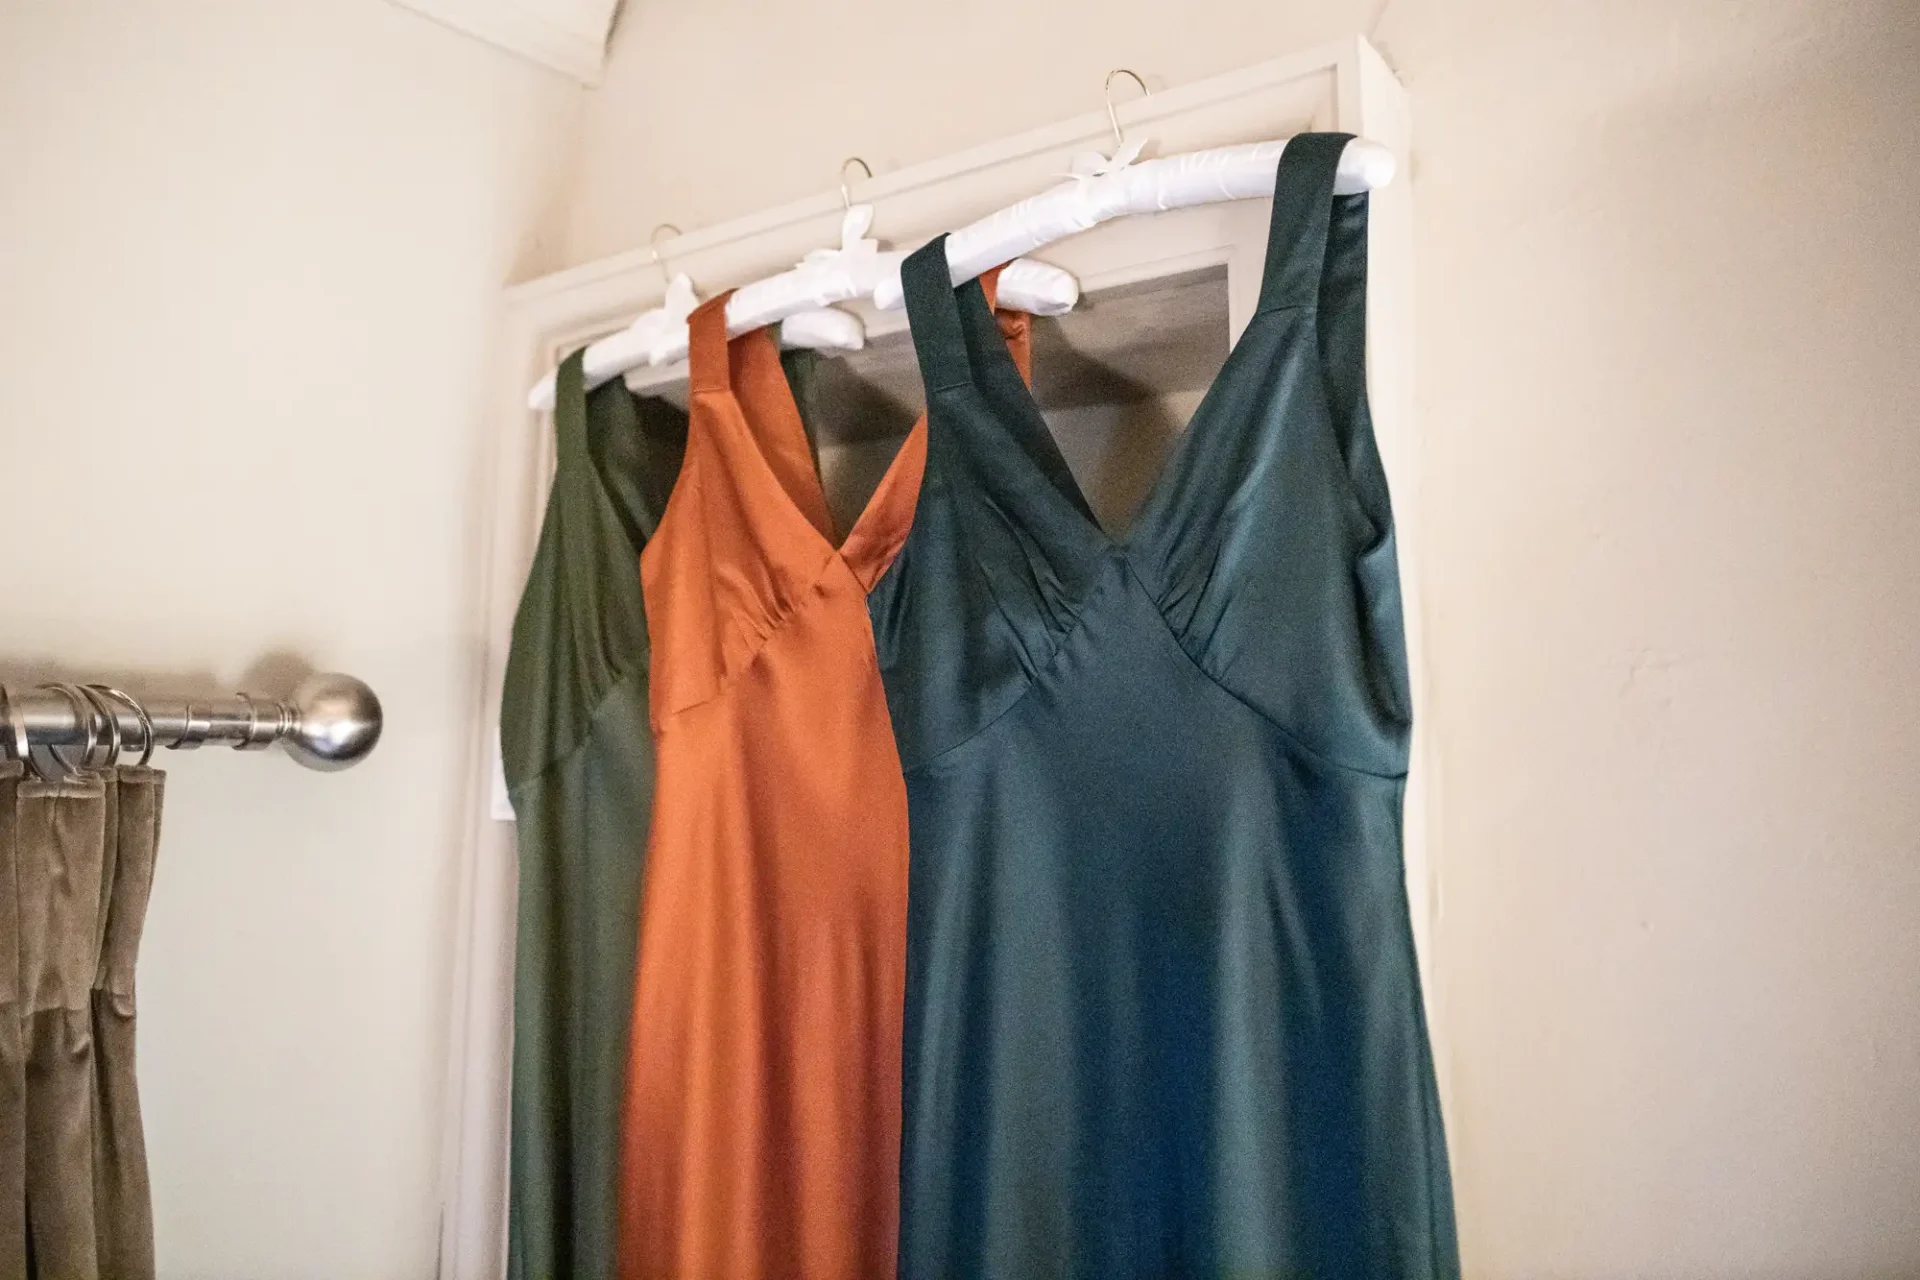 Three dresses in orange, teal, and dark green hanging on white hangers against a plain, beige wall.